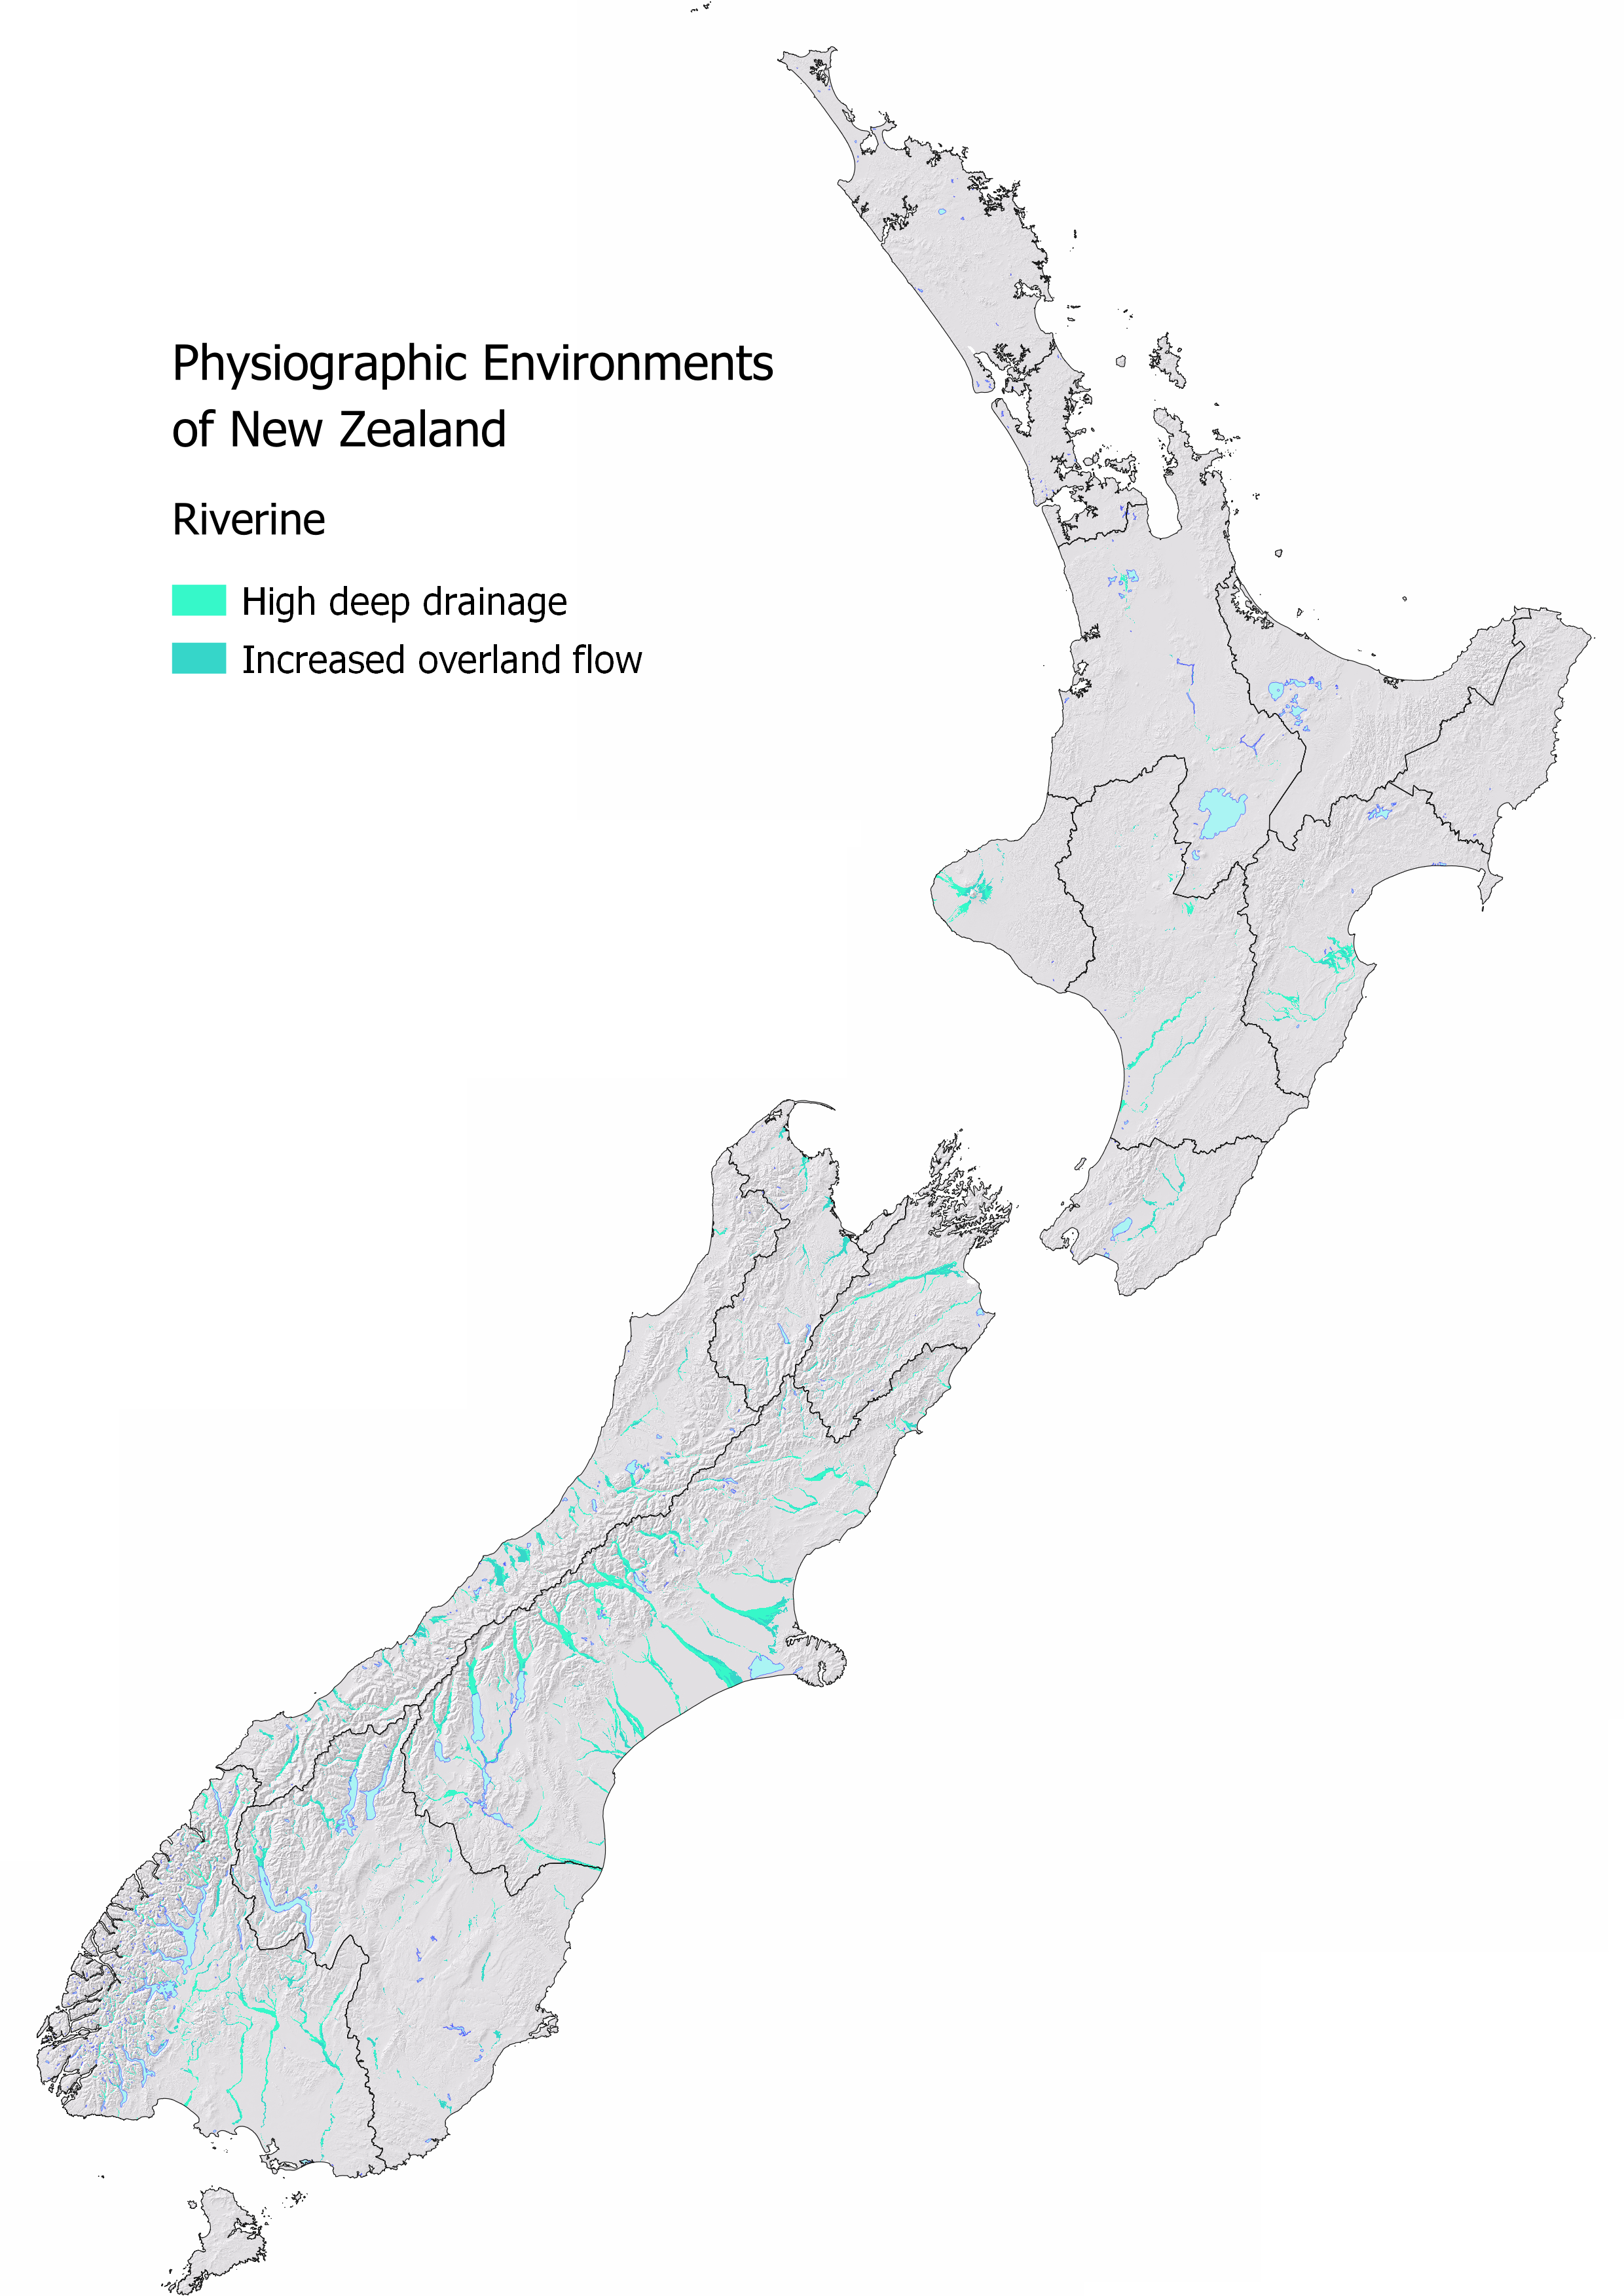 slope map of new zealand with the parts classified as 'Riverine' showing.